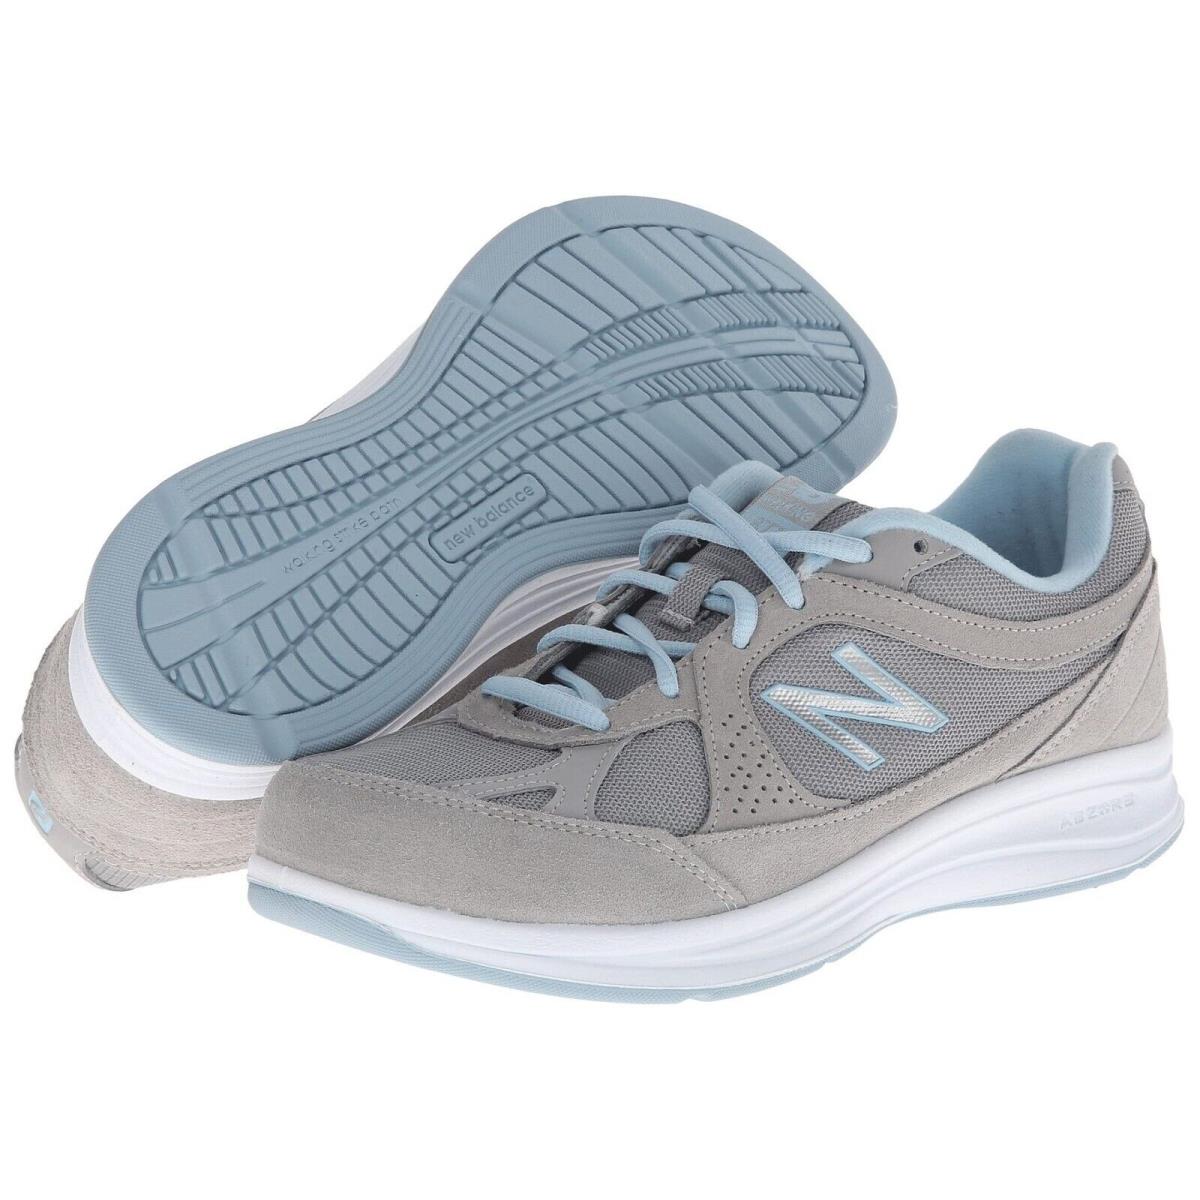 New Balance N7768 Womens Silver Ww877 Low Top Lace Up Running Sneaker Size 7.5